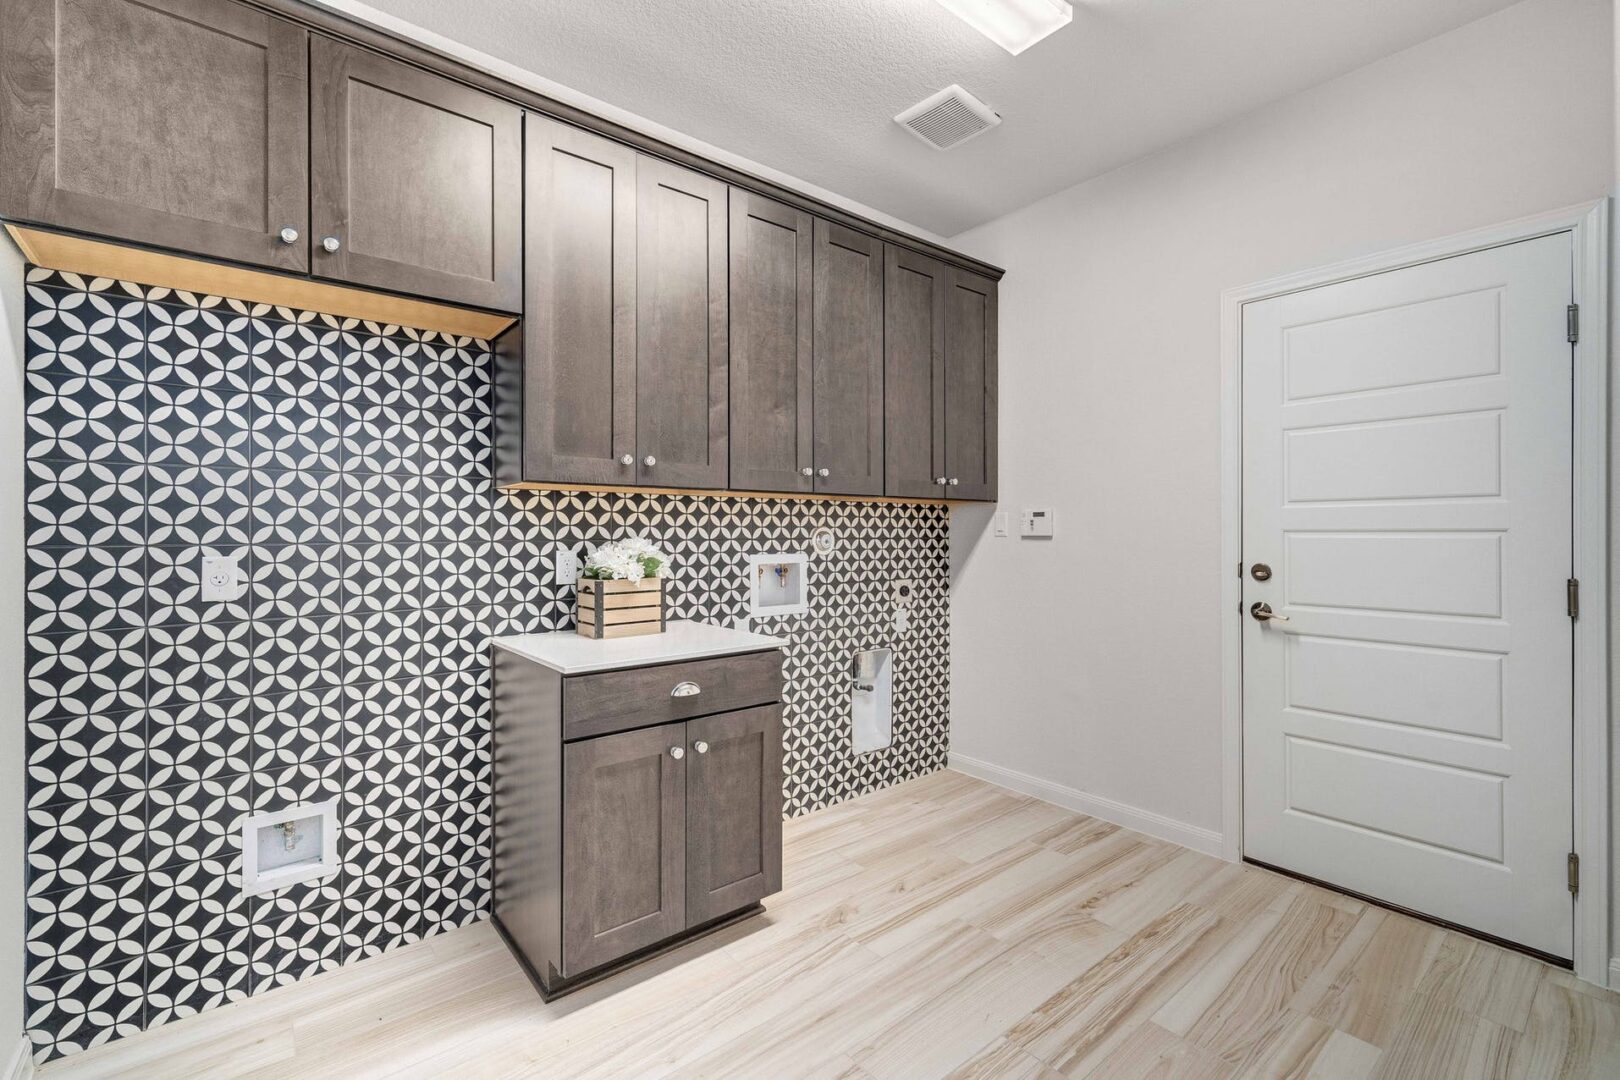 A laundry room with tiled walls and cabinets.